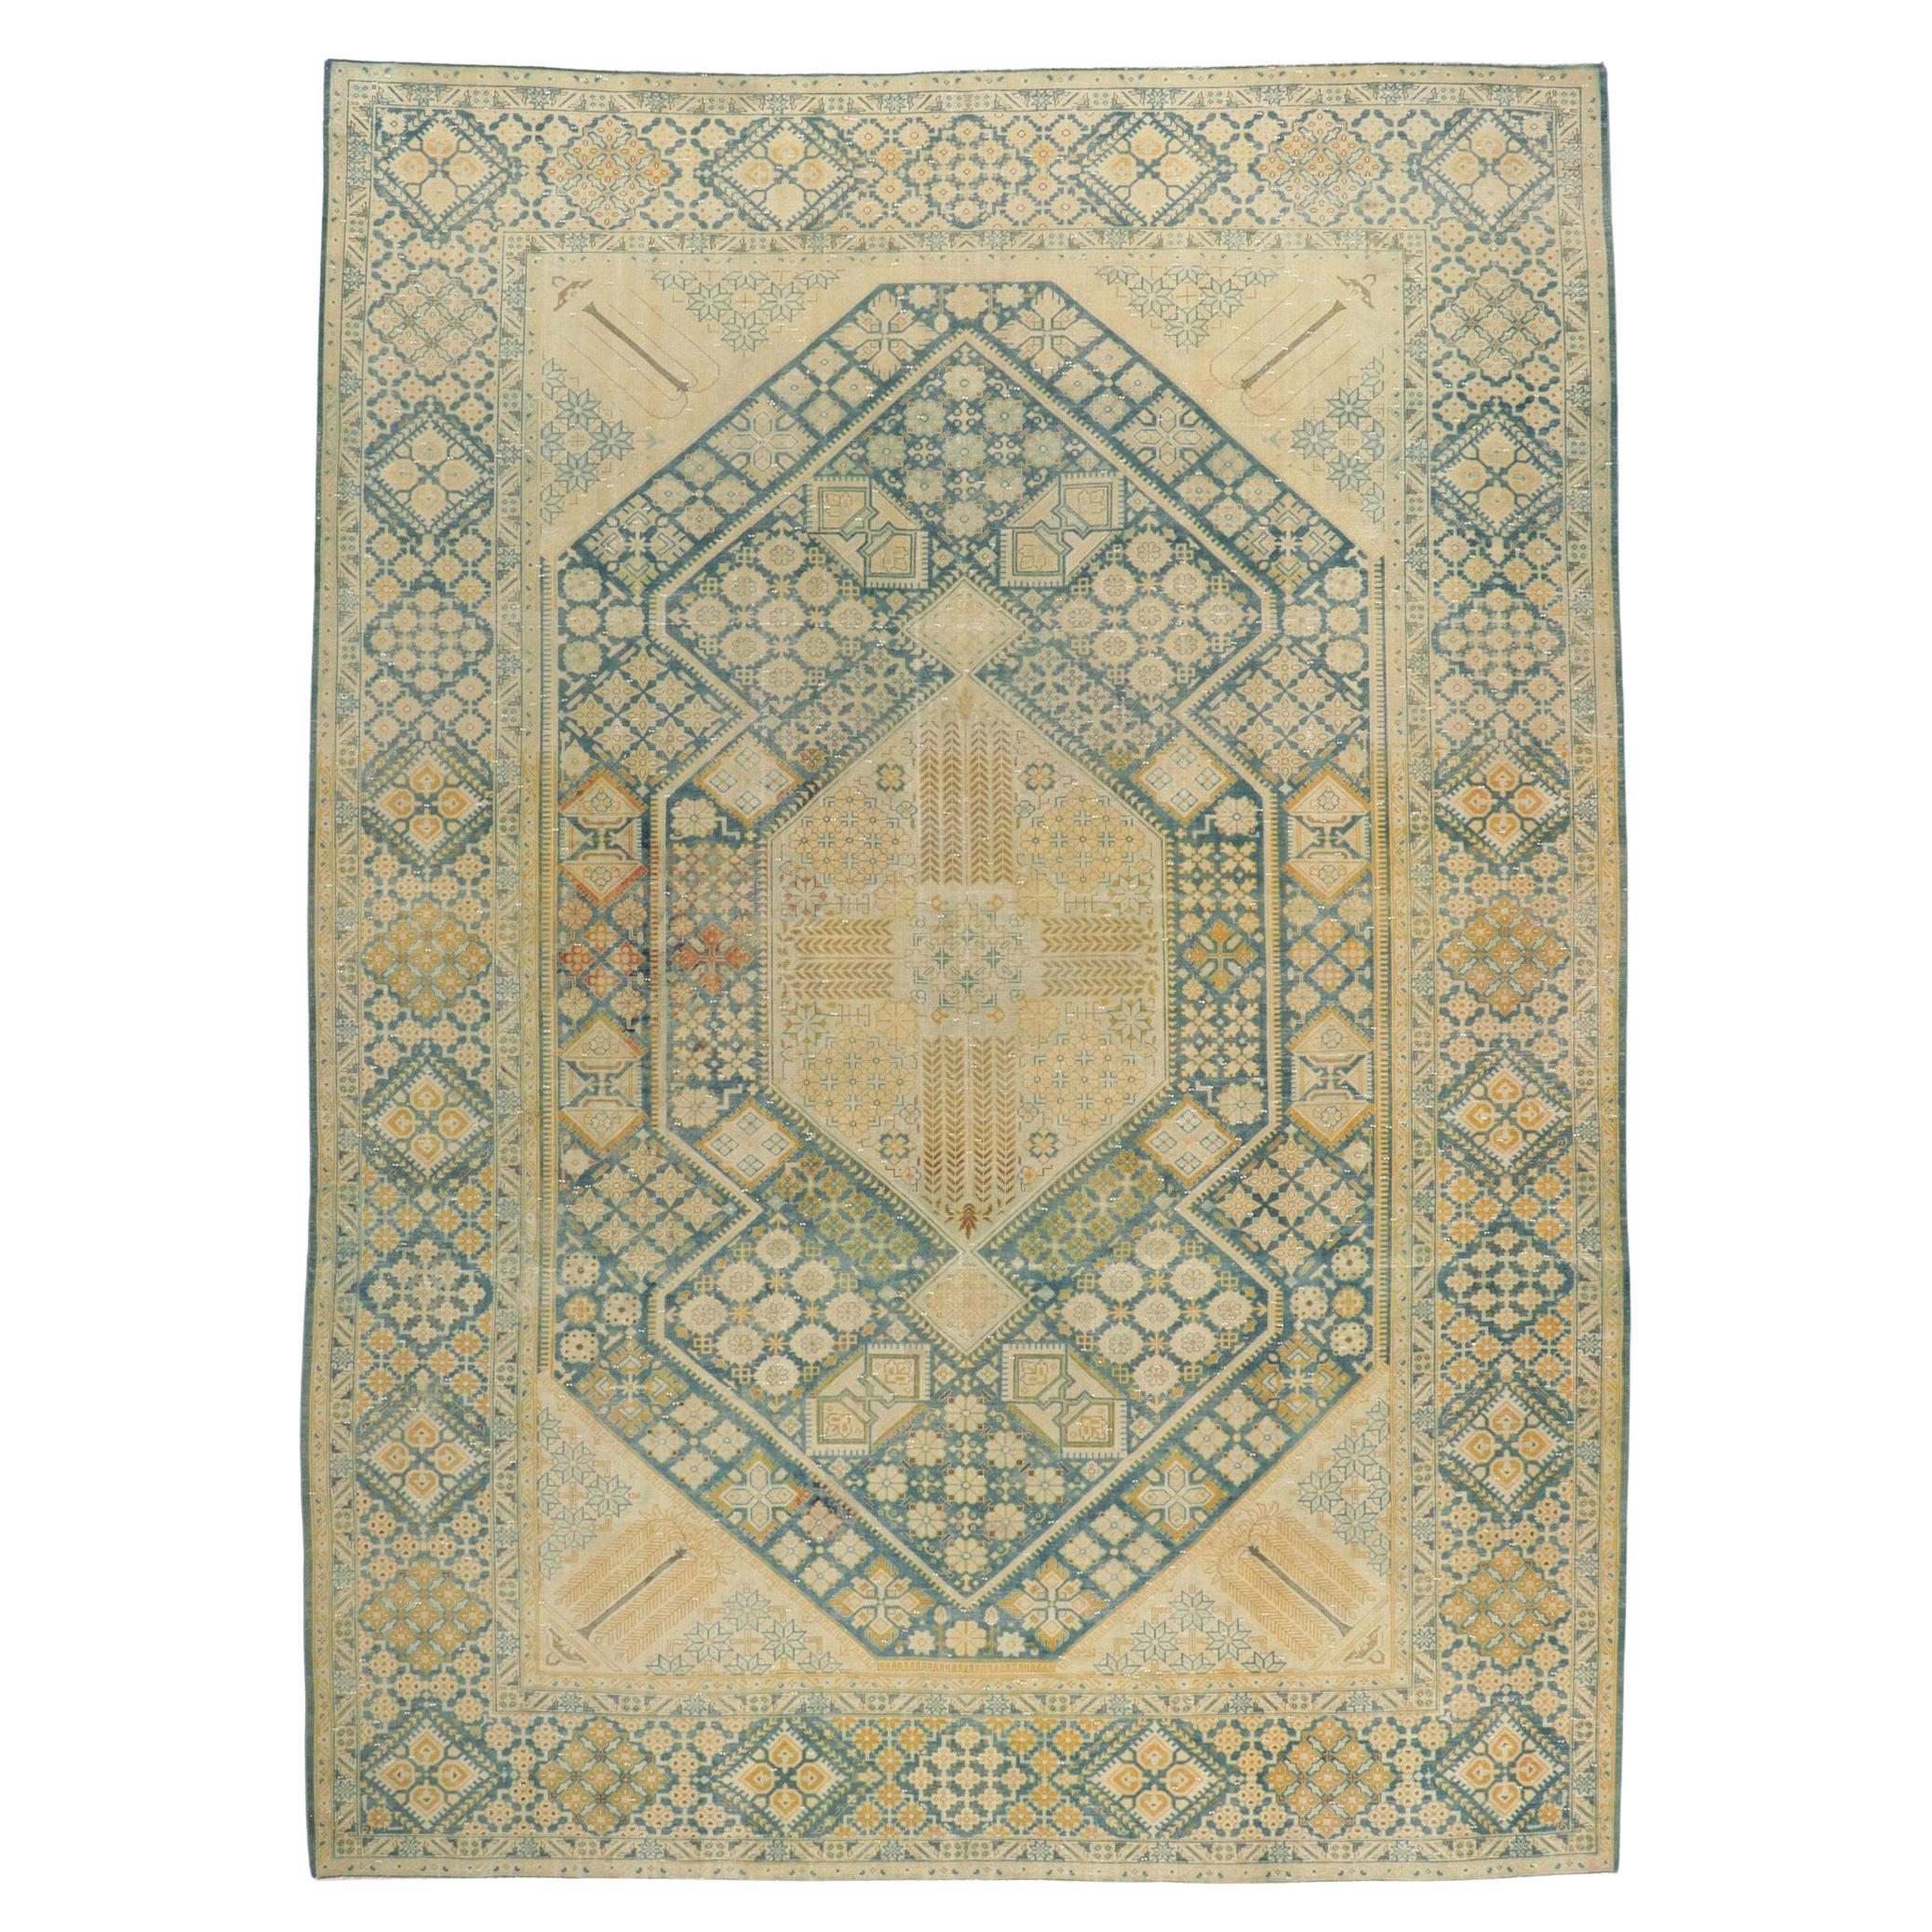 Vintage Persian Tabriz Rug with Faded Soft Colors